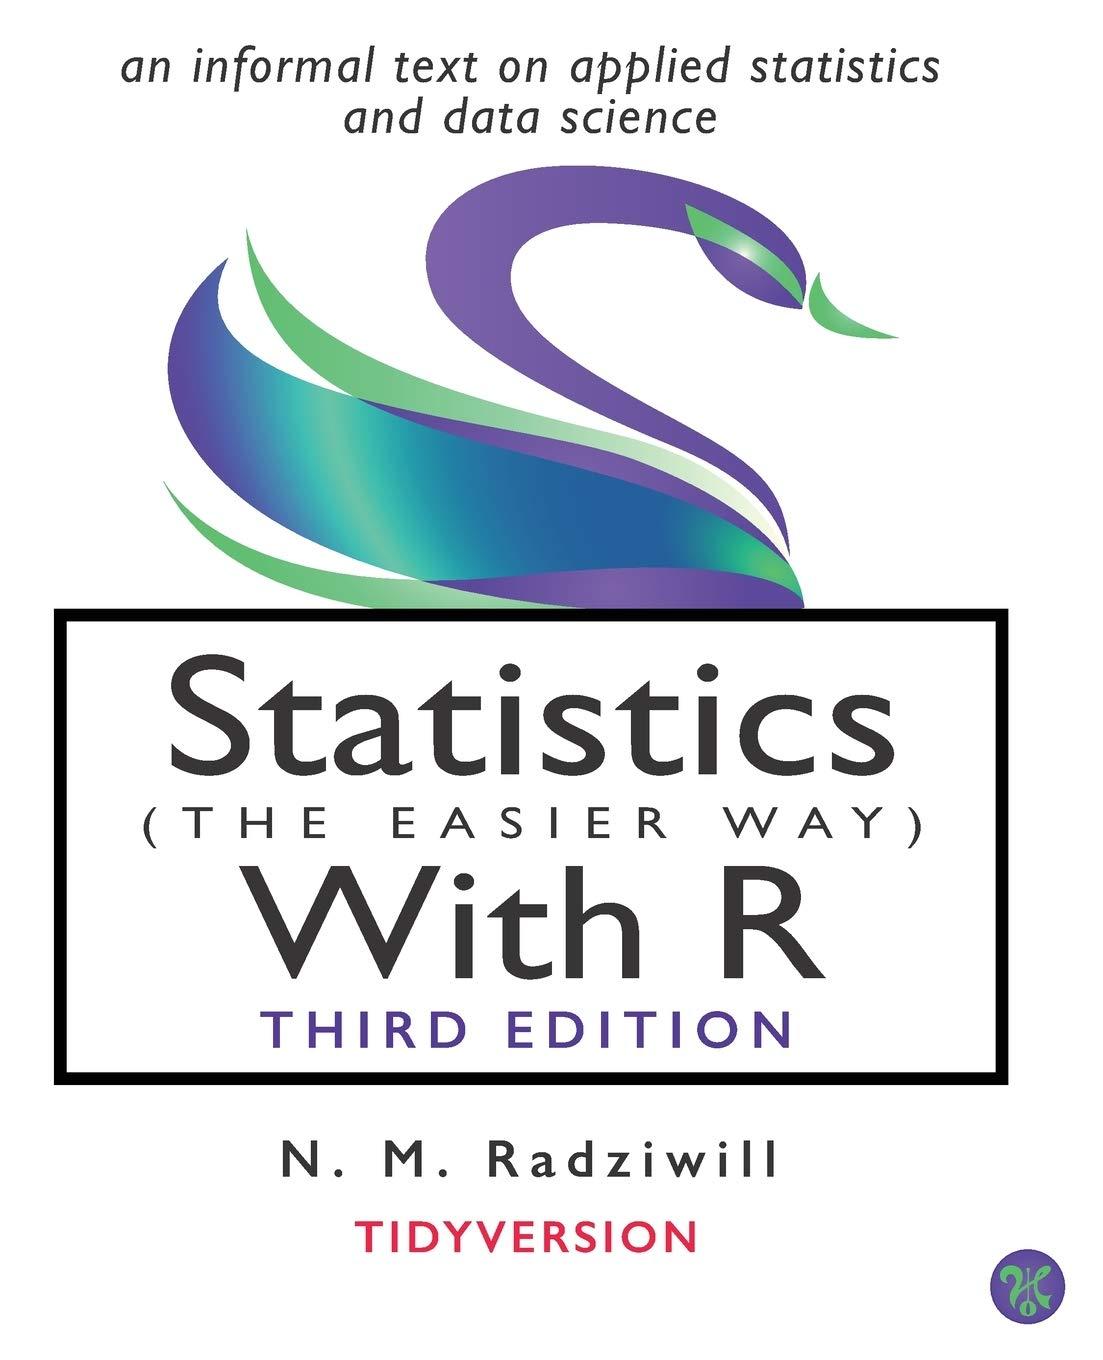 statistics the easier way with r 3rd edition n m radziwill, m c benton 0996916032, 9780996916035